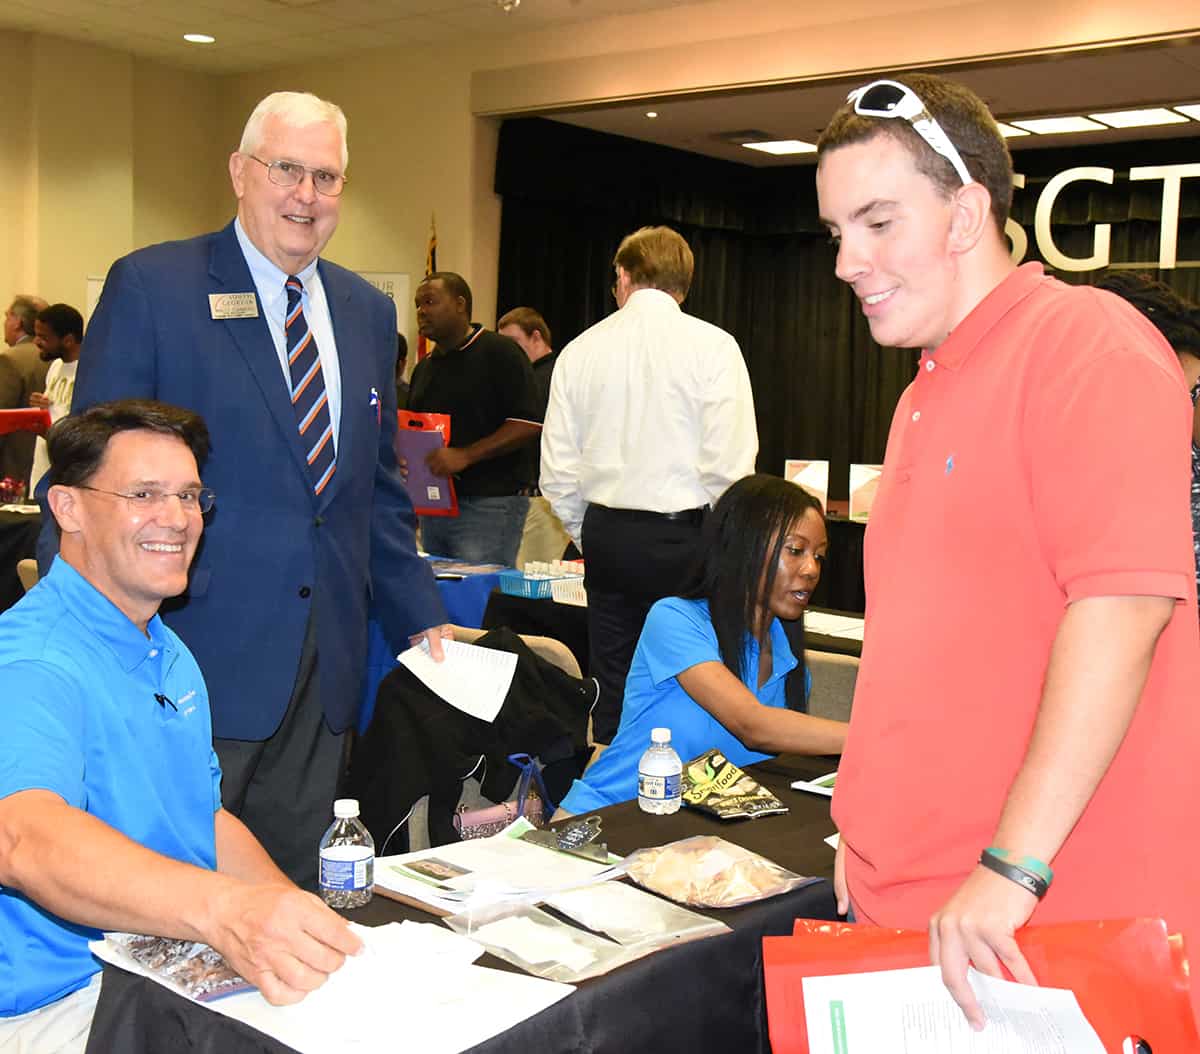 Wally Summers (standing, left), Vice President of Economic Development at South Georgia Technical College, with representatives from International Paper at the Job Fair